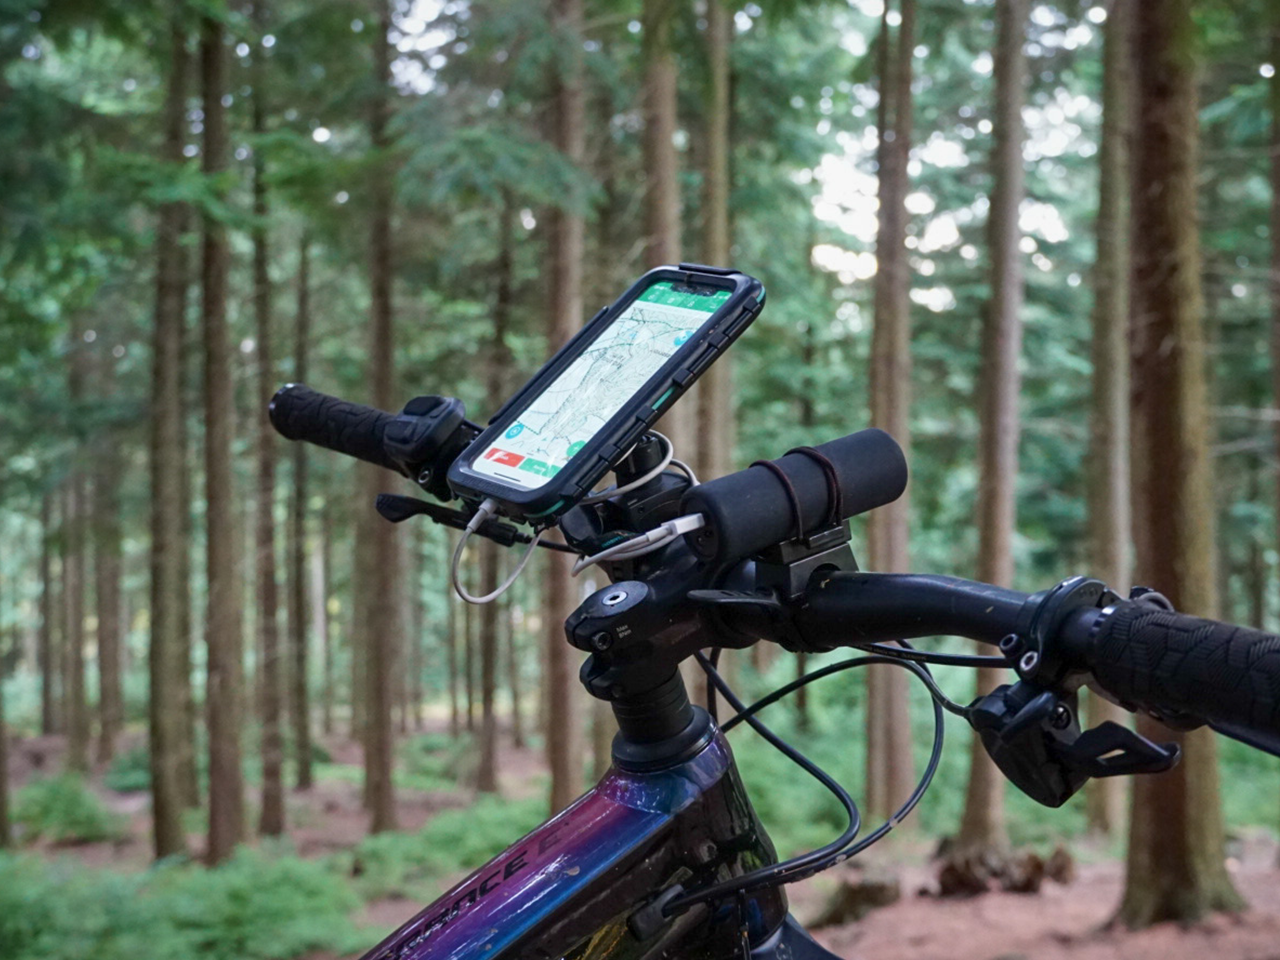 Durable Bike Mount Attachments with Tough Case for iPhone XR